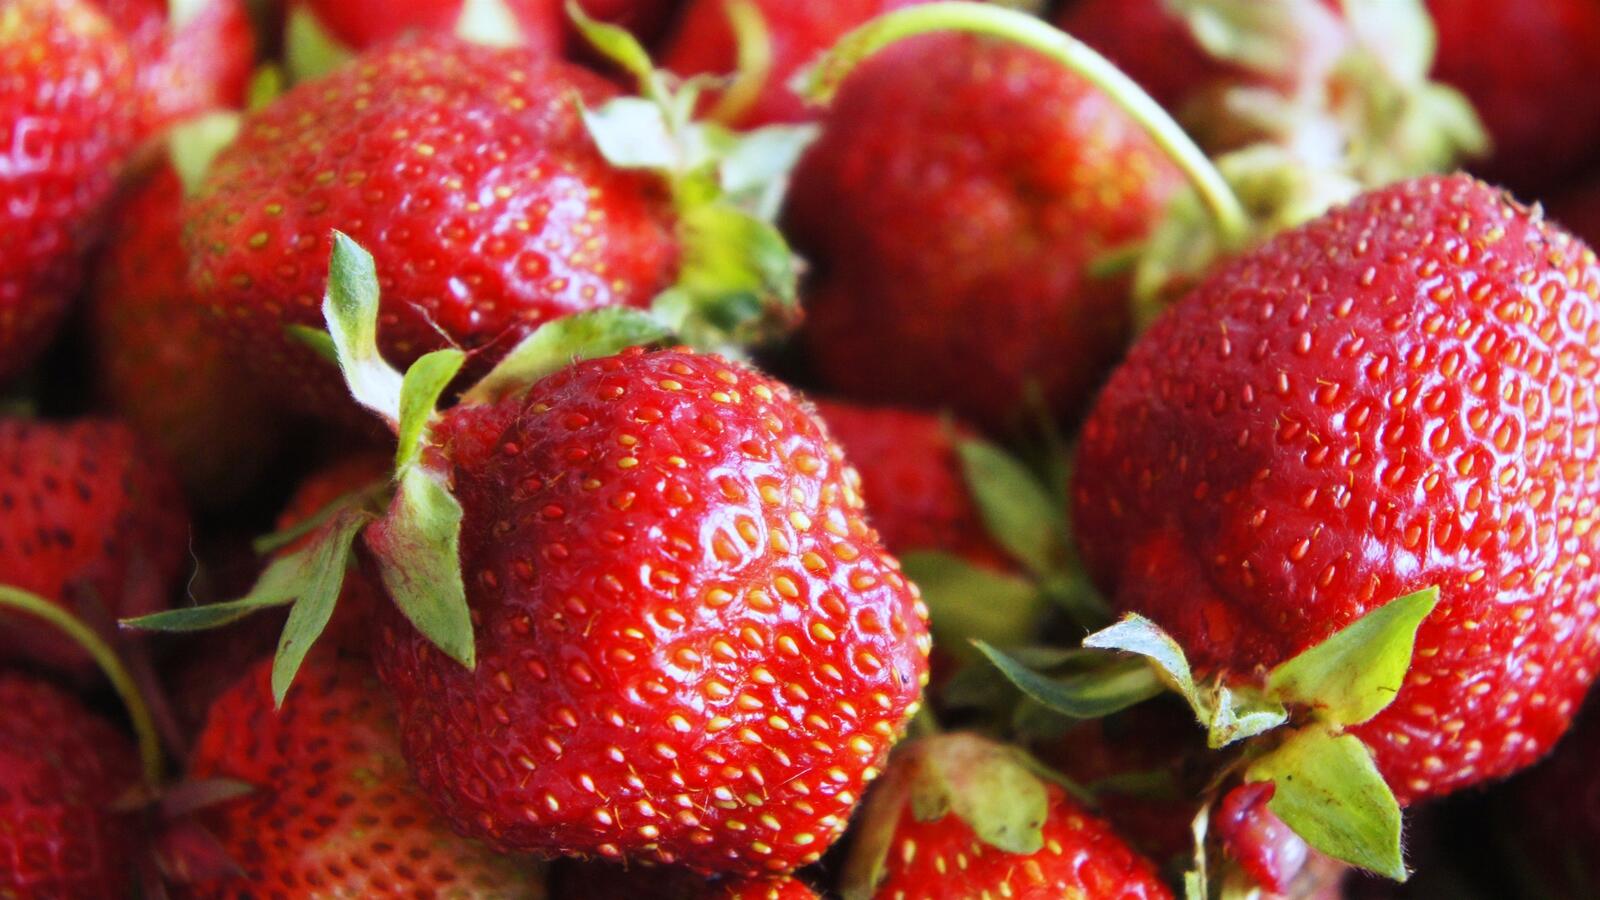 Wallpapers strawberries fruits close on the desktop